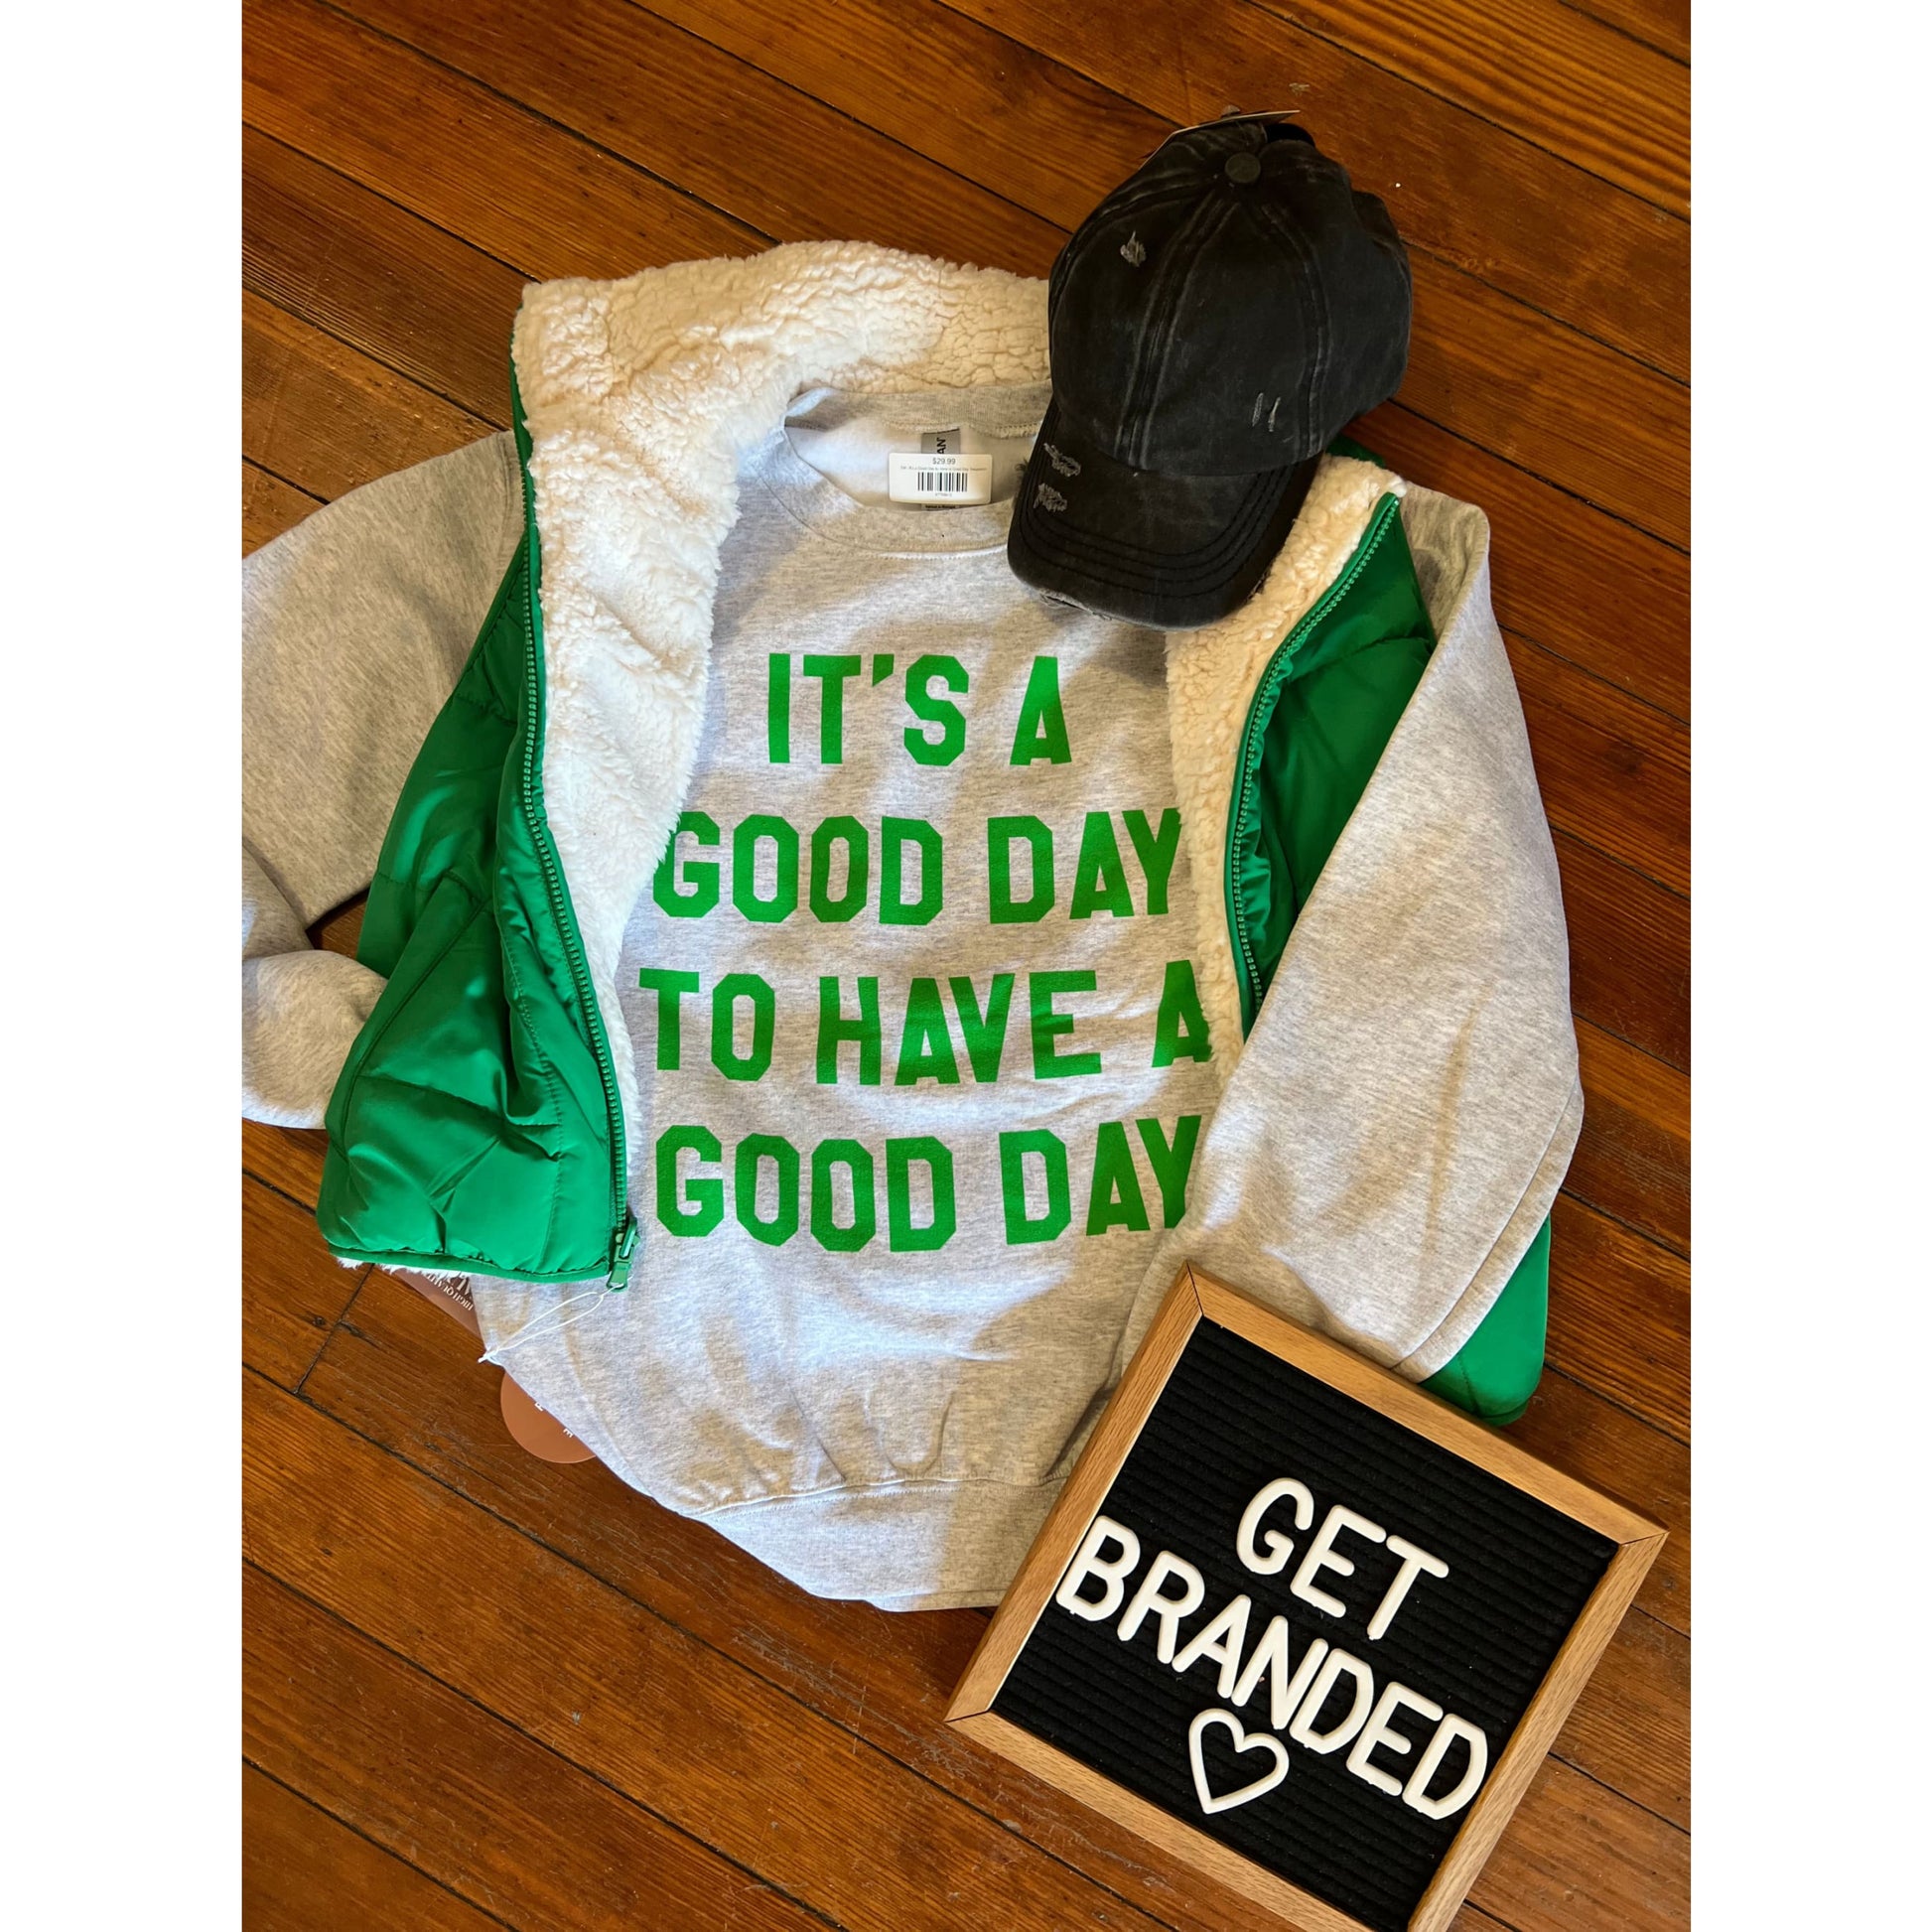 It’s a Good Day to Have a Good Day Sweatshirt